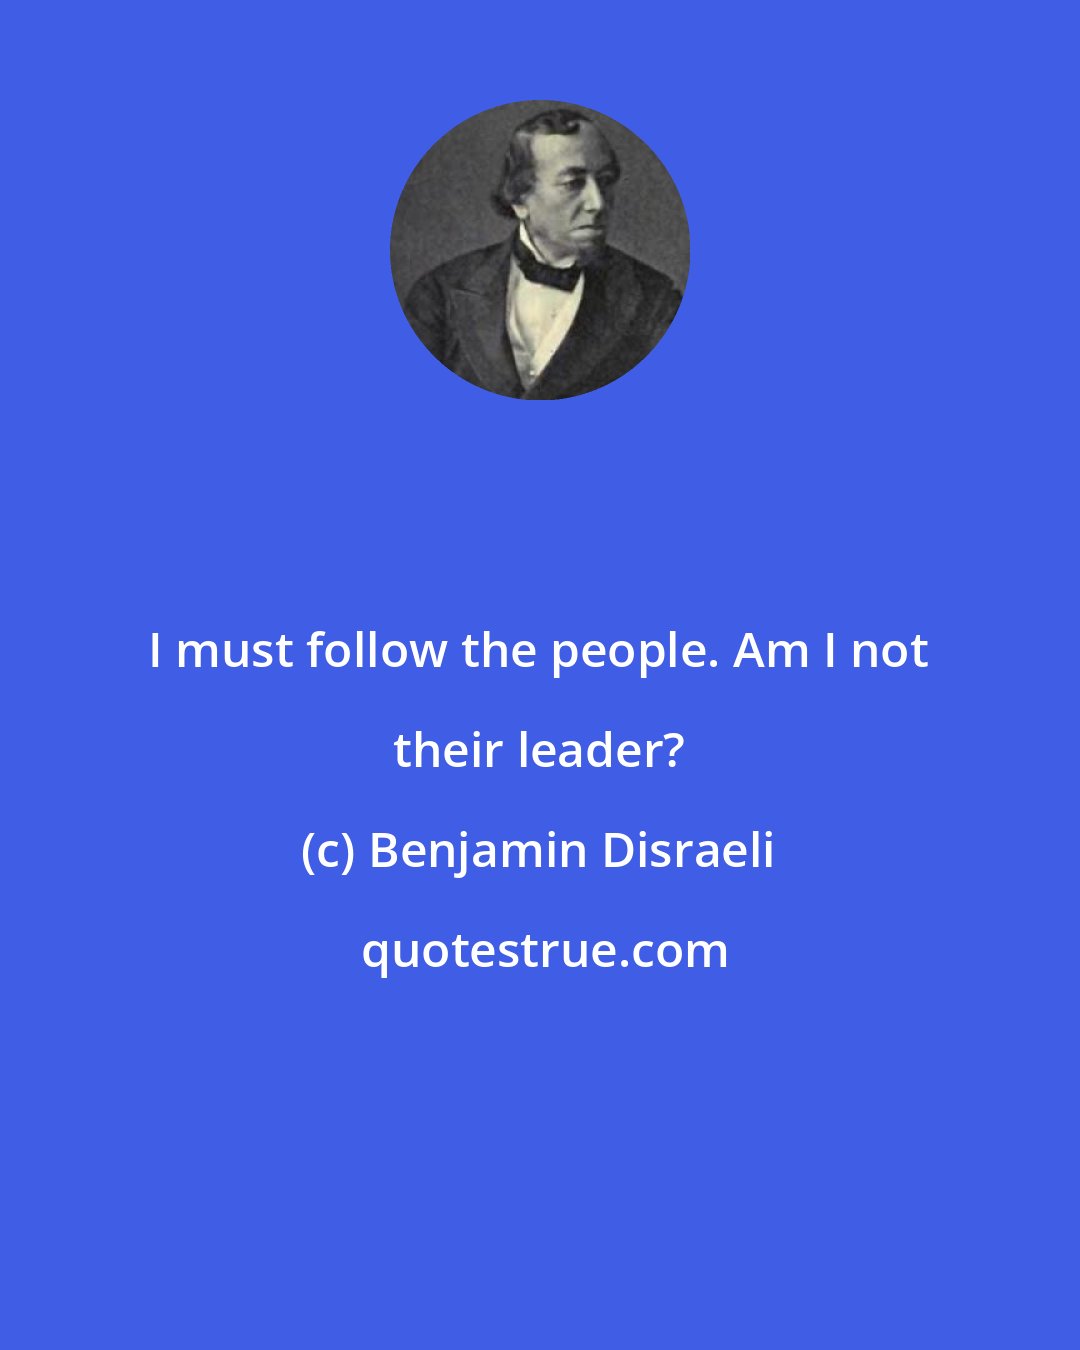 Benjamin Disraeli: I must follow the people. Am I not their leader?